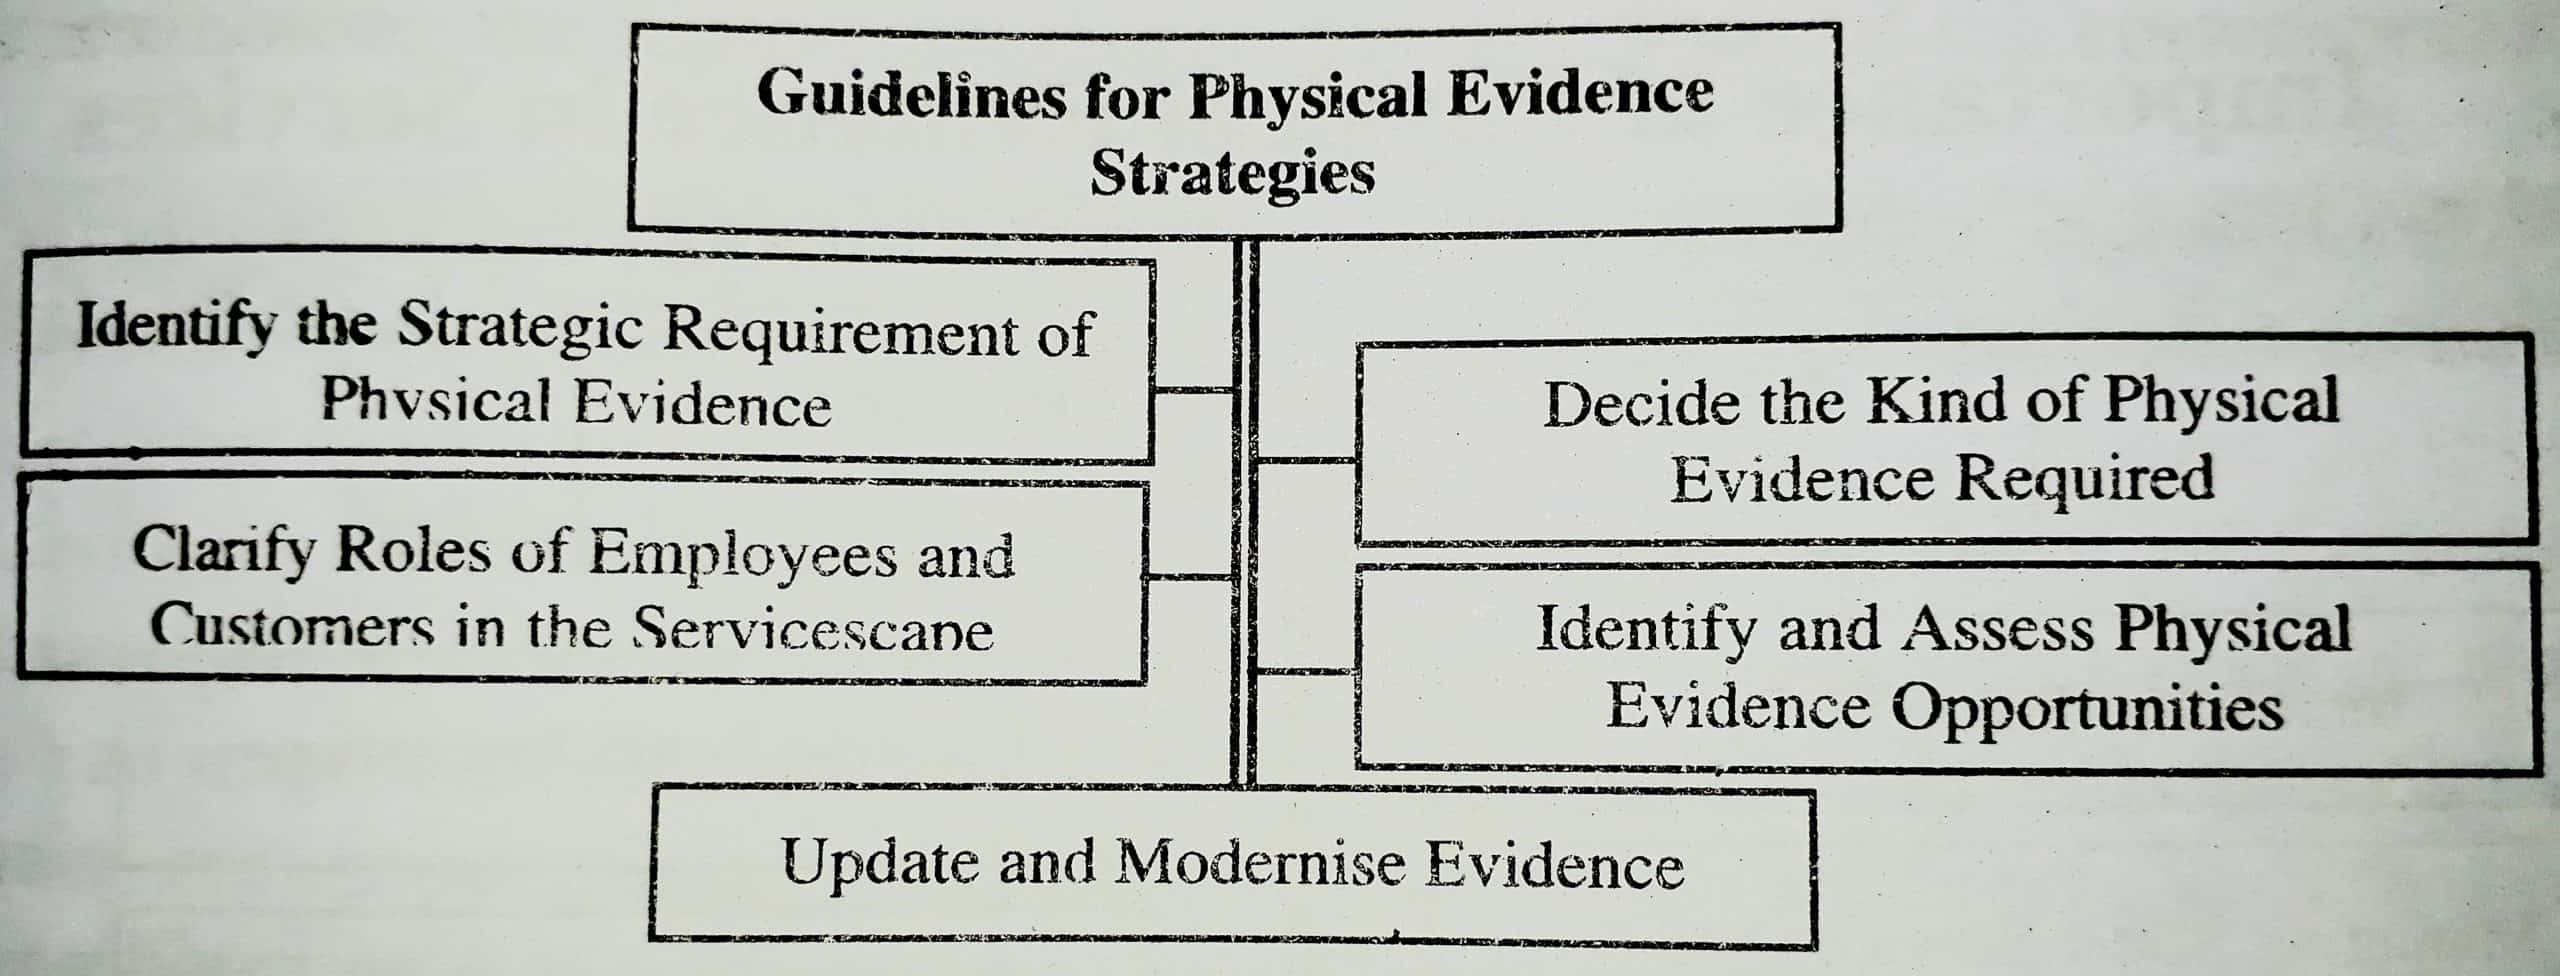 Guidelines for Effective Physical Evidence